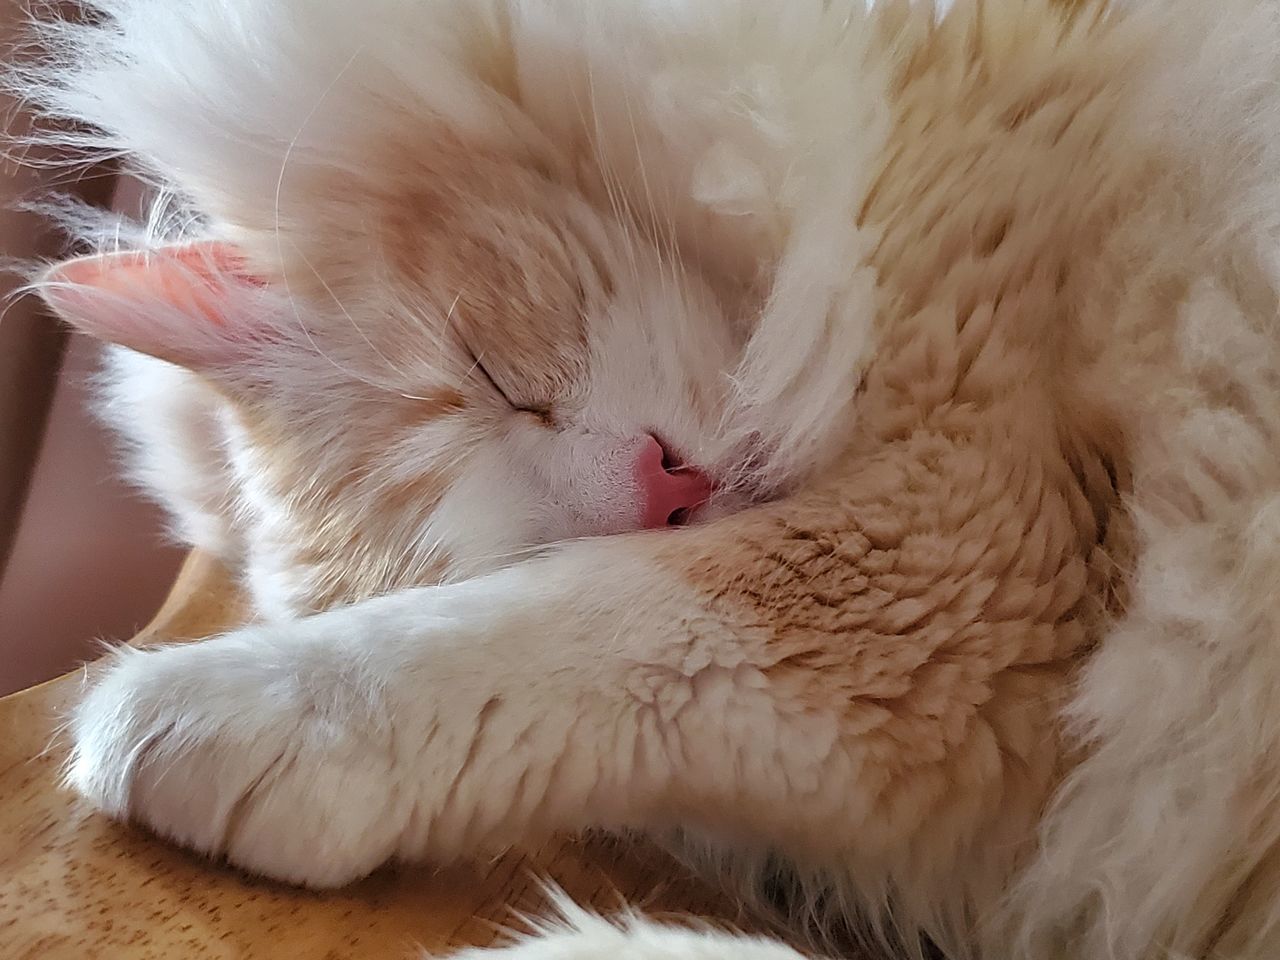 CLOSE-UP OF CAT SLEEPING ON BED